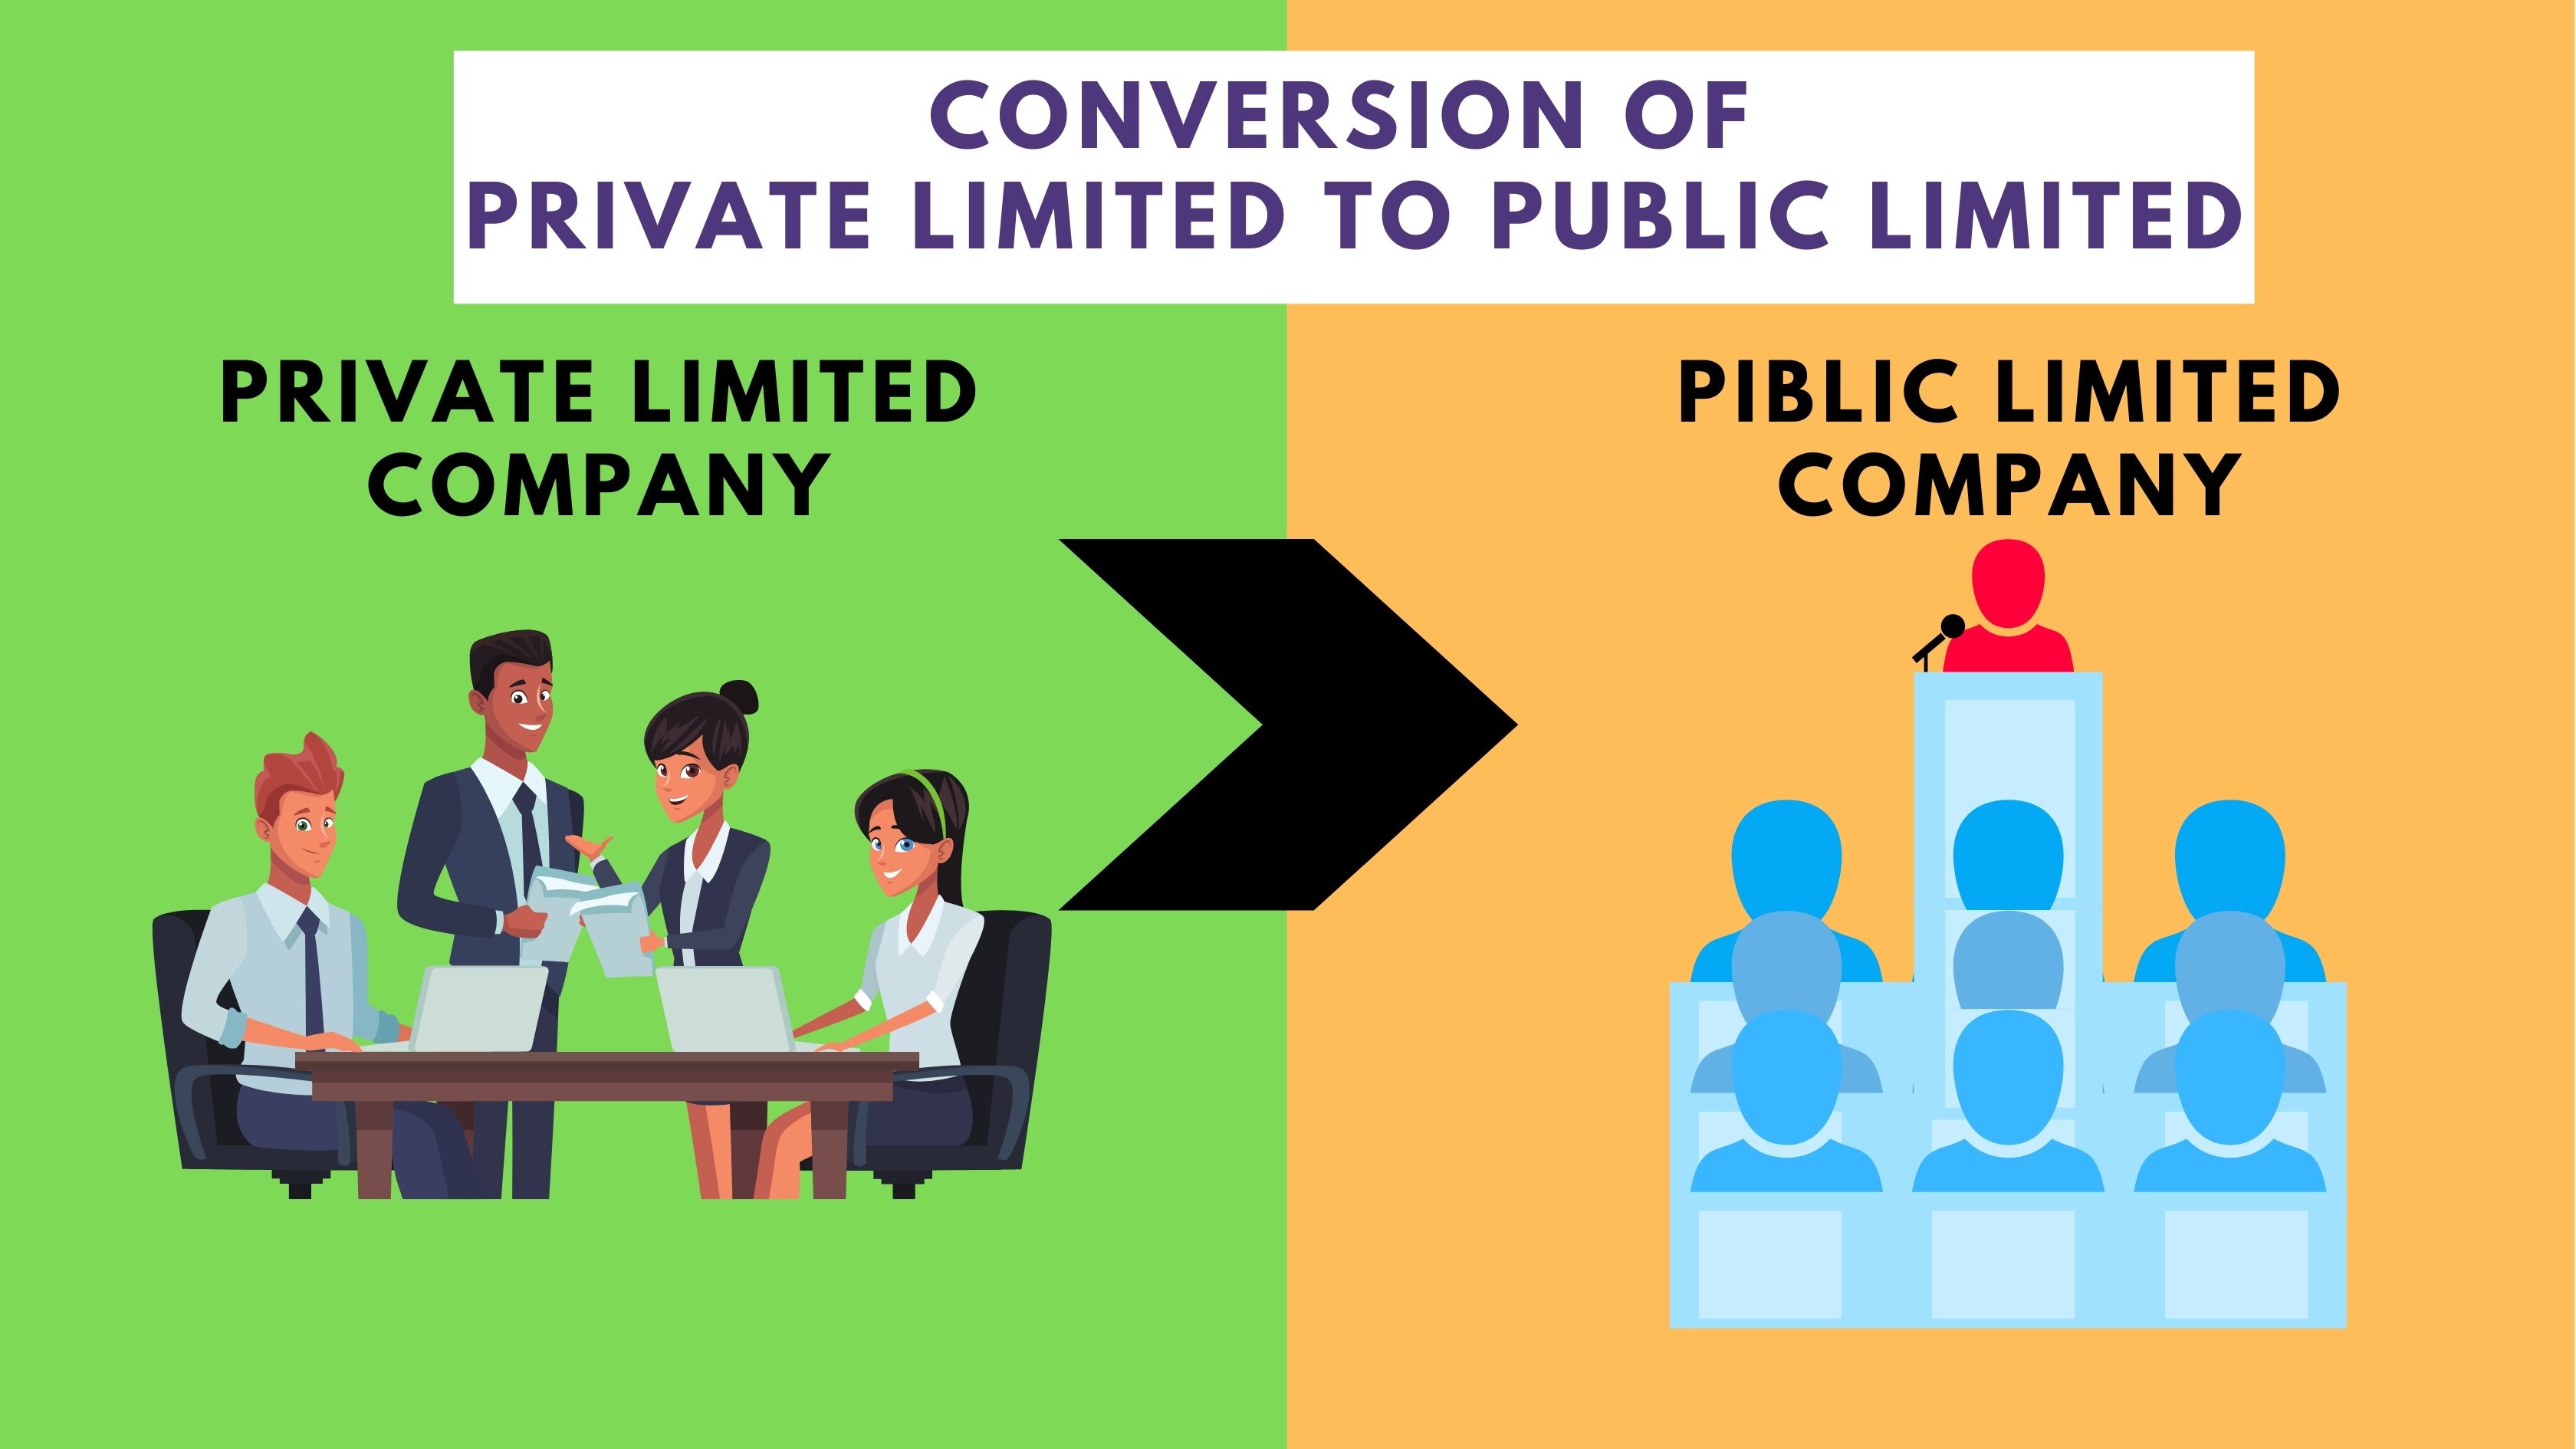 Conversion of Private limited company to Public limited company